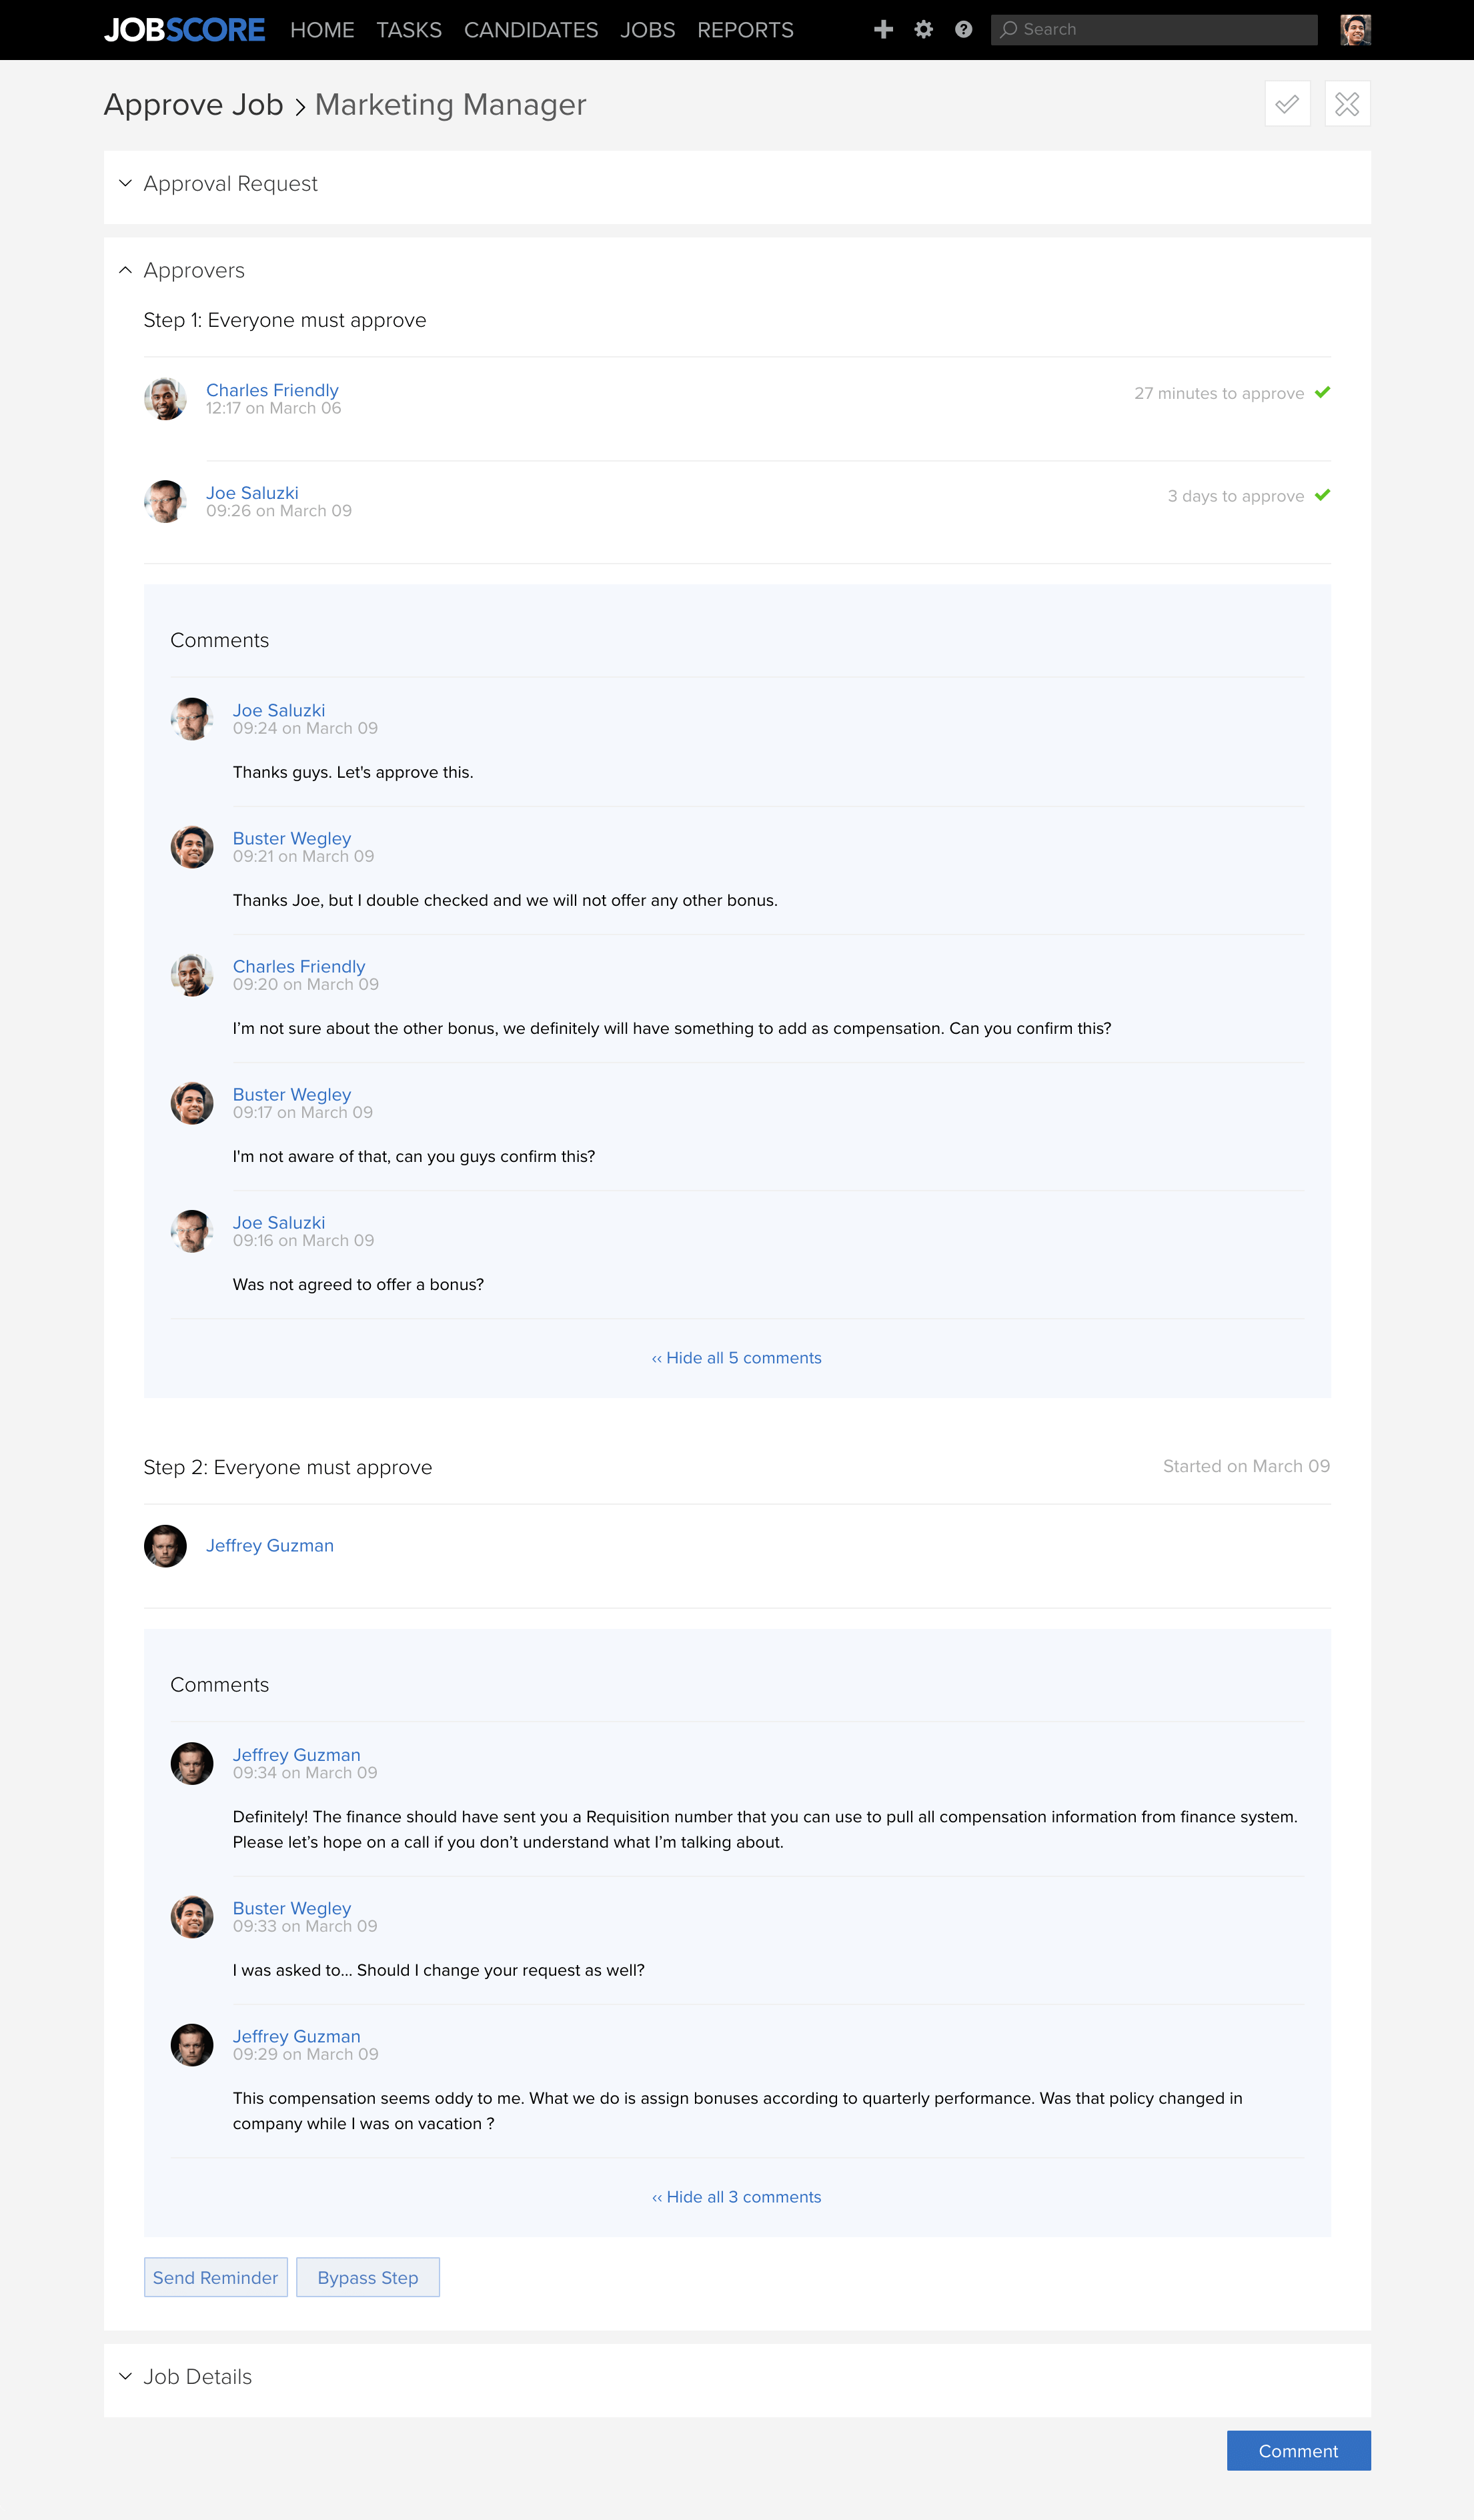 Approval page - comments